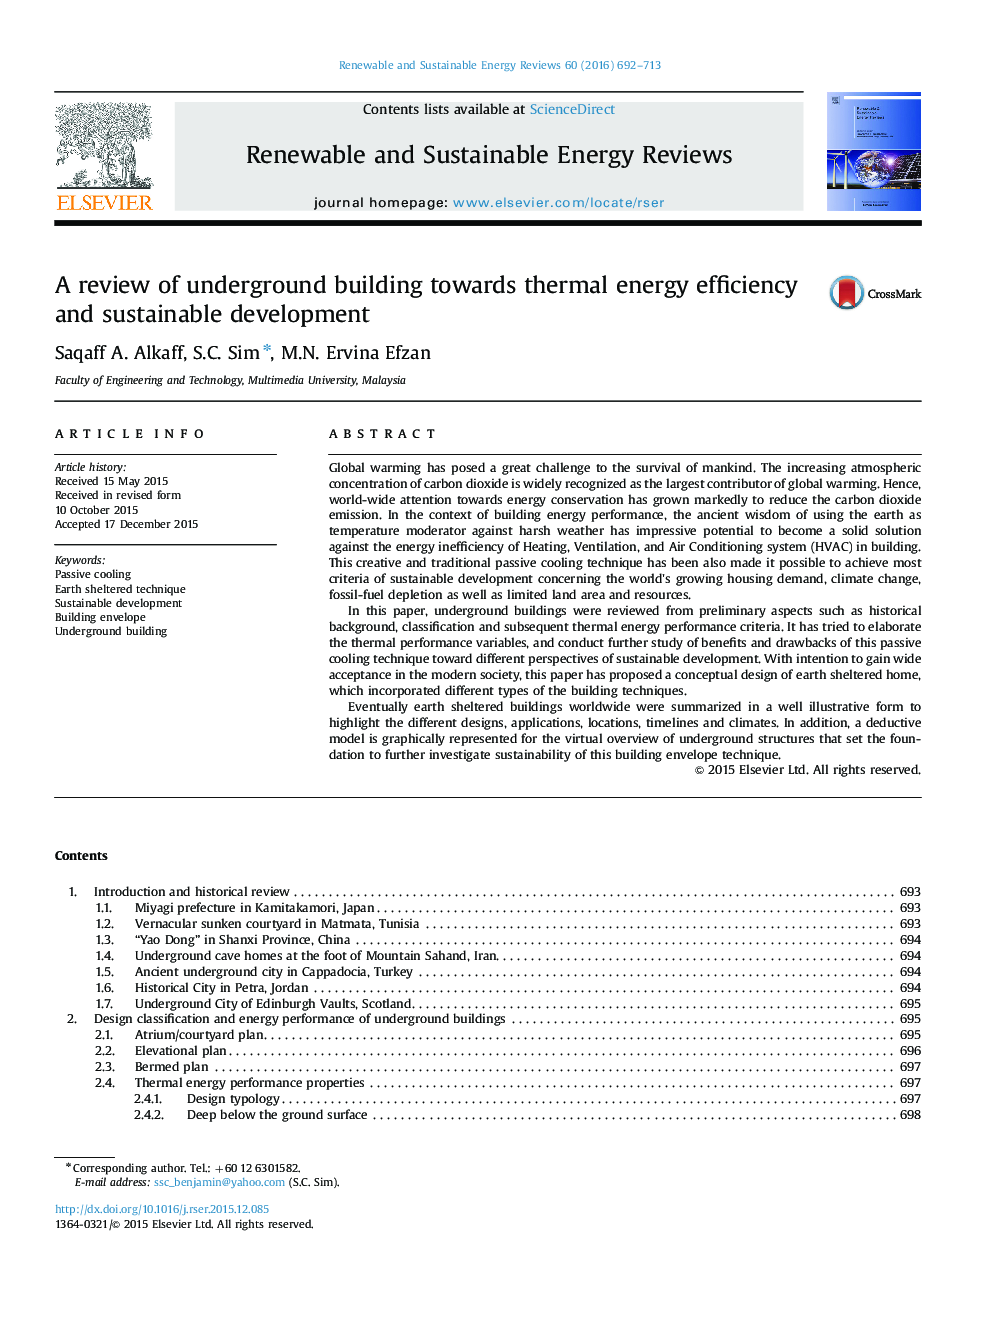 A review of underground building towards thermal energy efficiency and sustainable development